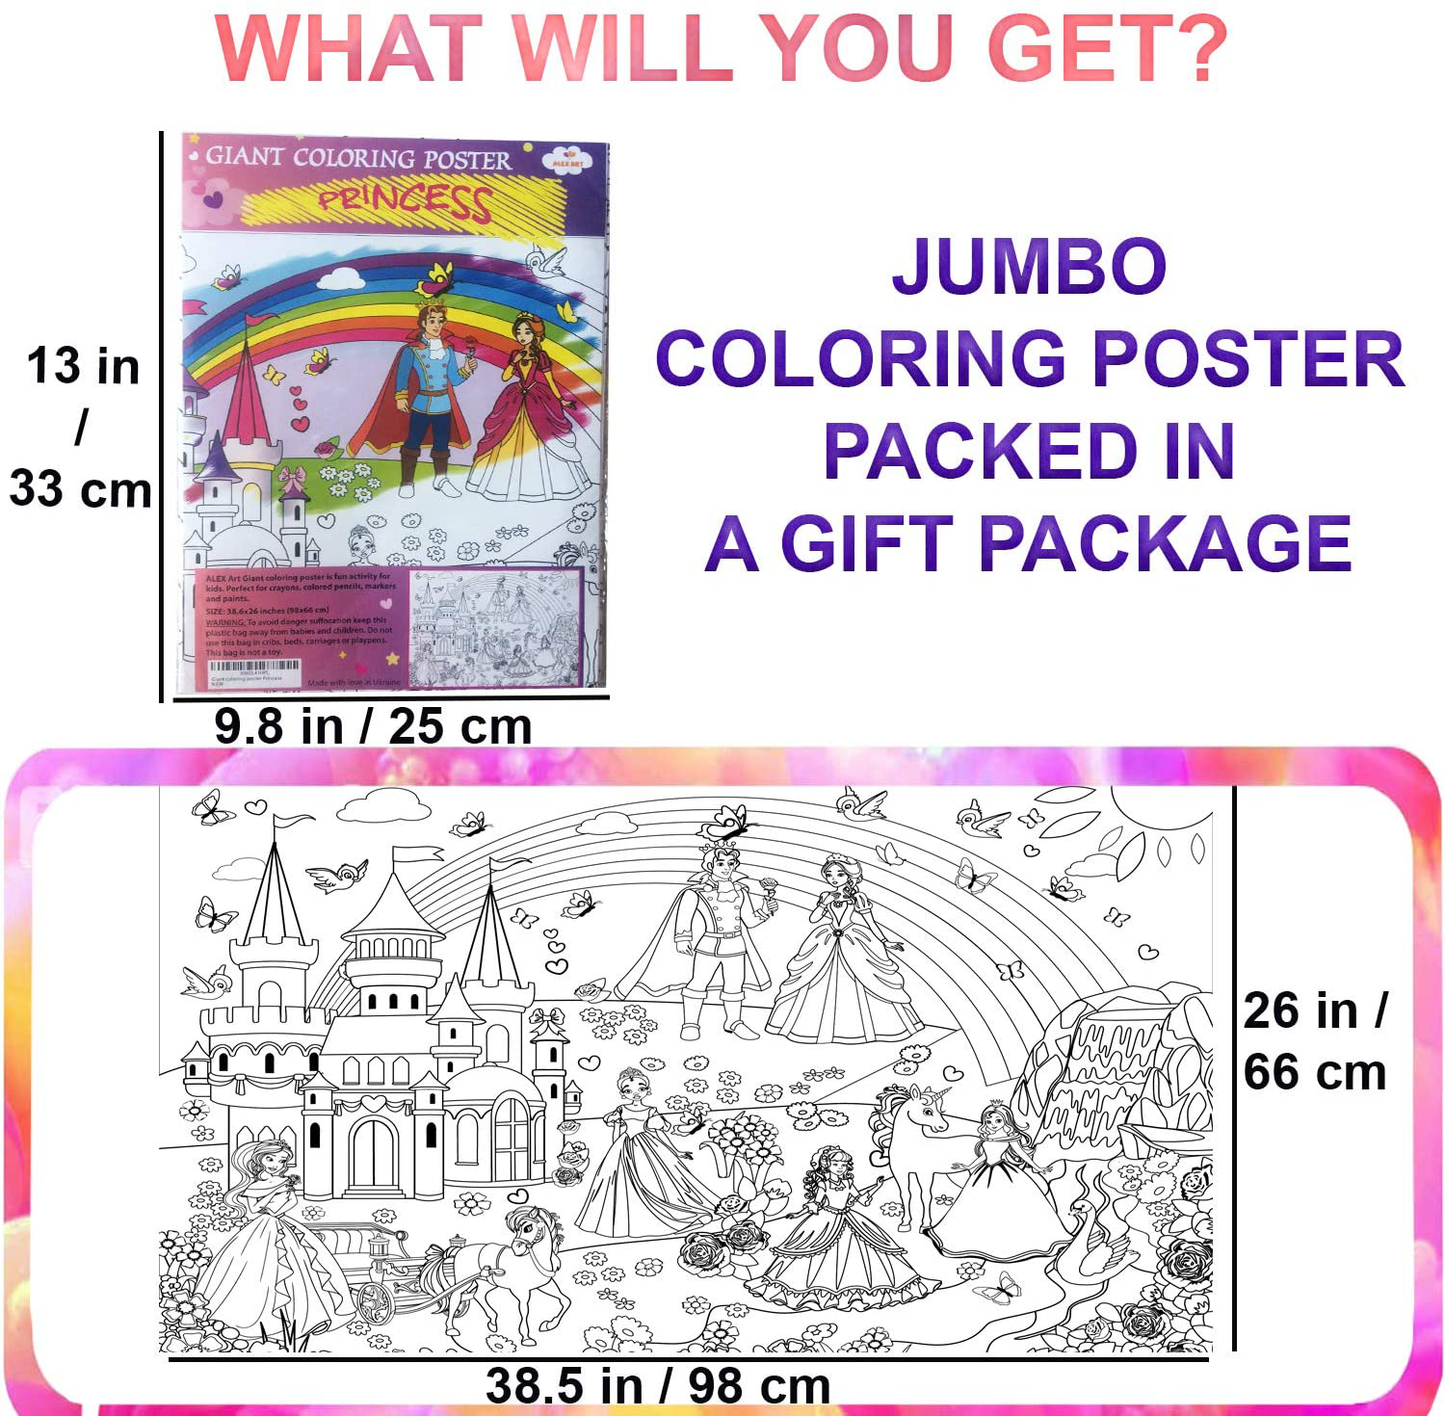 Alex Art, Giant Coloring Poster - Princess Huge Posters to Color - Large Coloring Poster for Wall - Coloring Posters for Kids - Giant Coloring Pages - Jumbo Coloring Poster, Big 38.5" x 26"